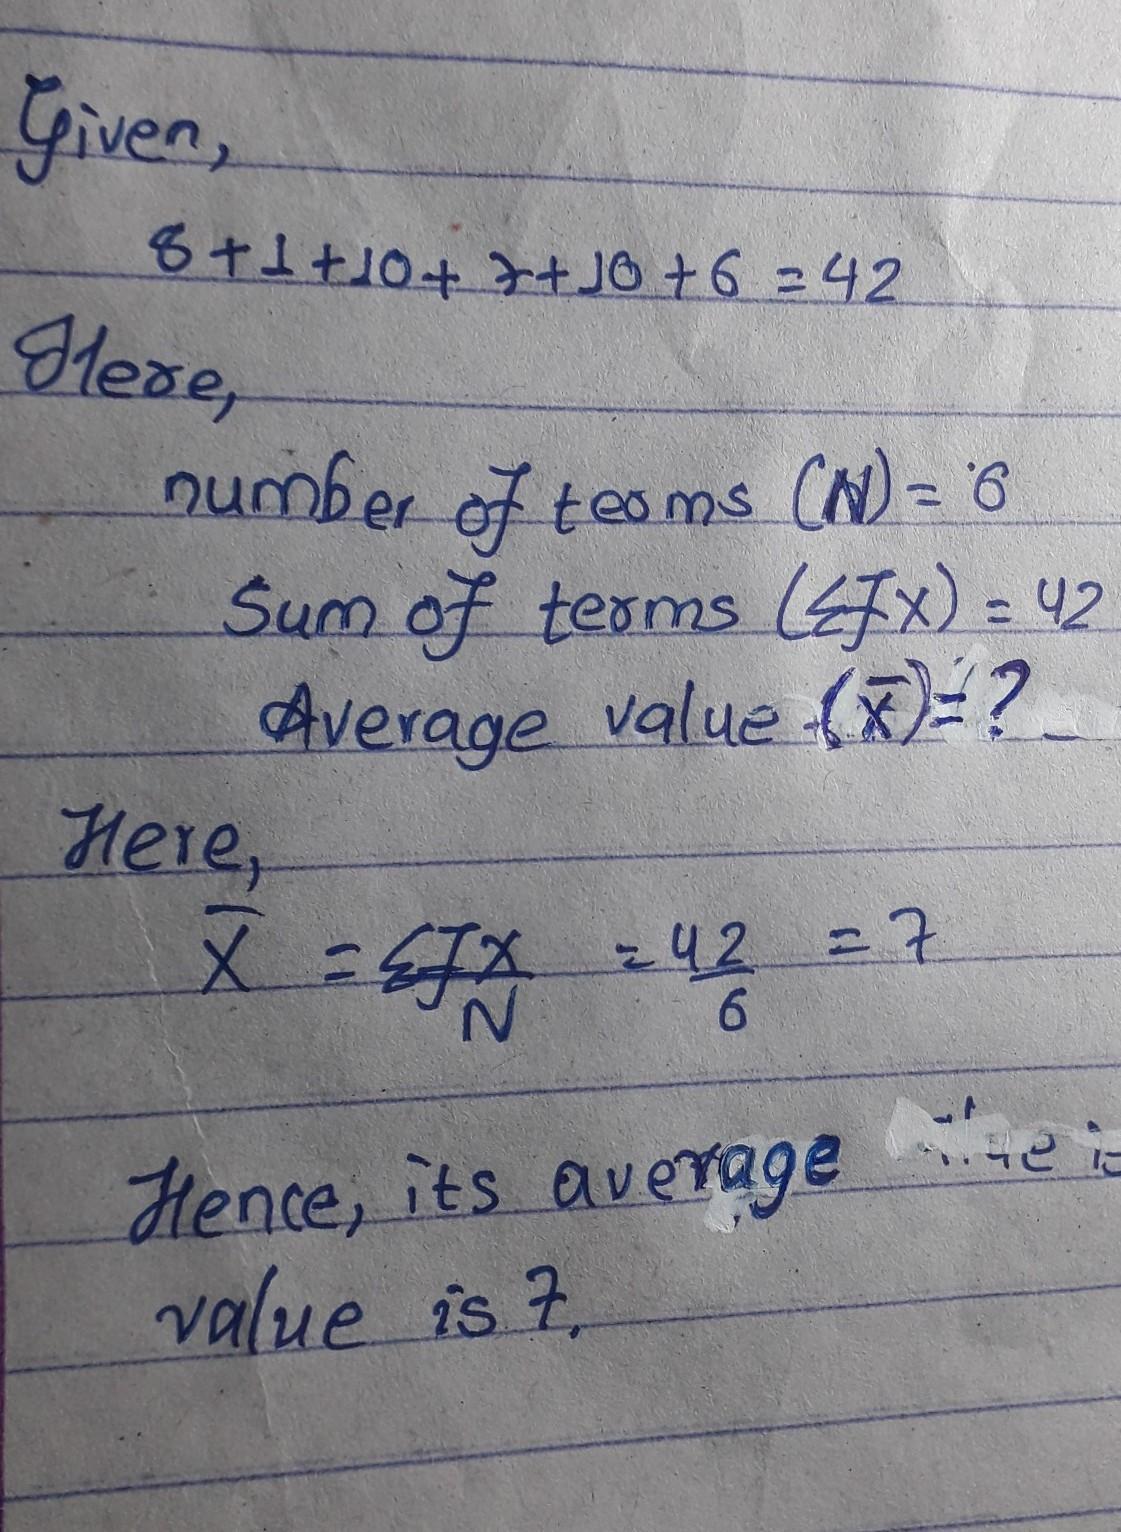 8 +1 + 10 + 7 + 10 + 6 = 42What Is The Average Value?